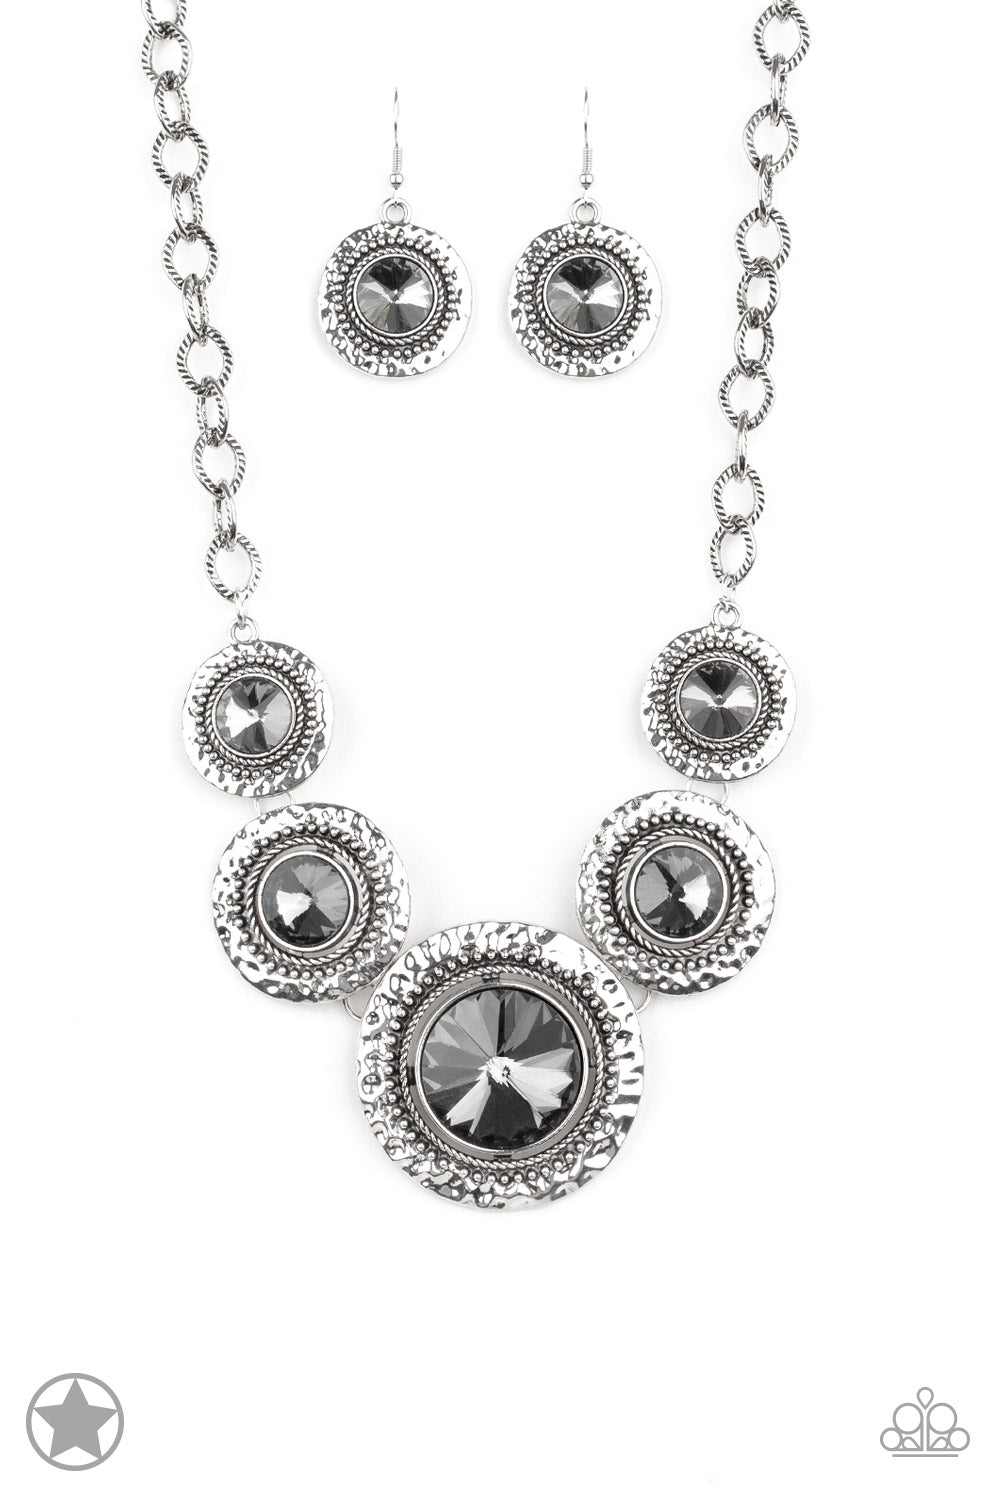 Global Glamour - Silver necklace set